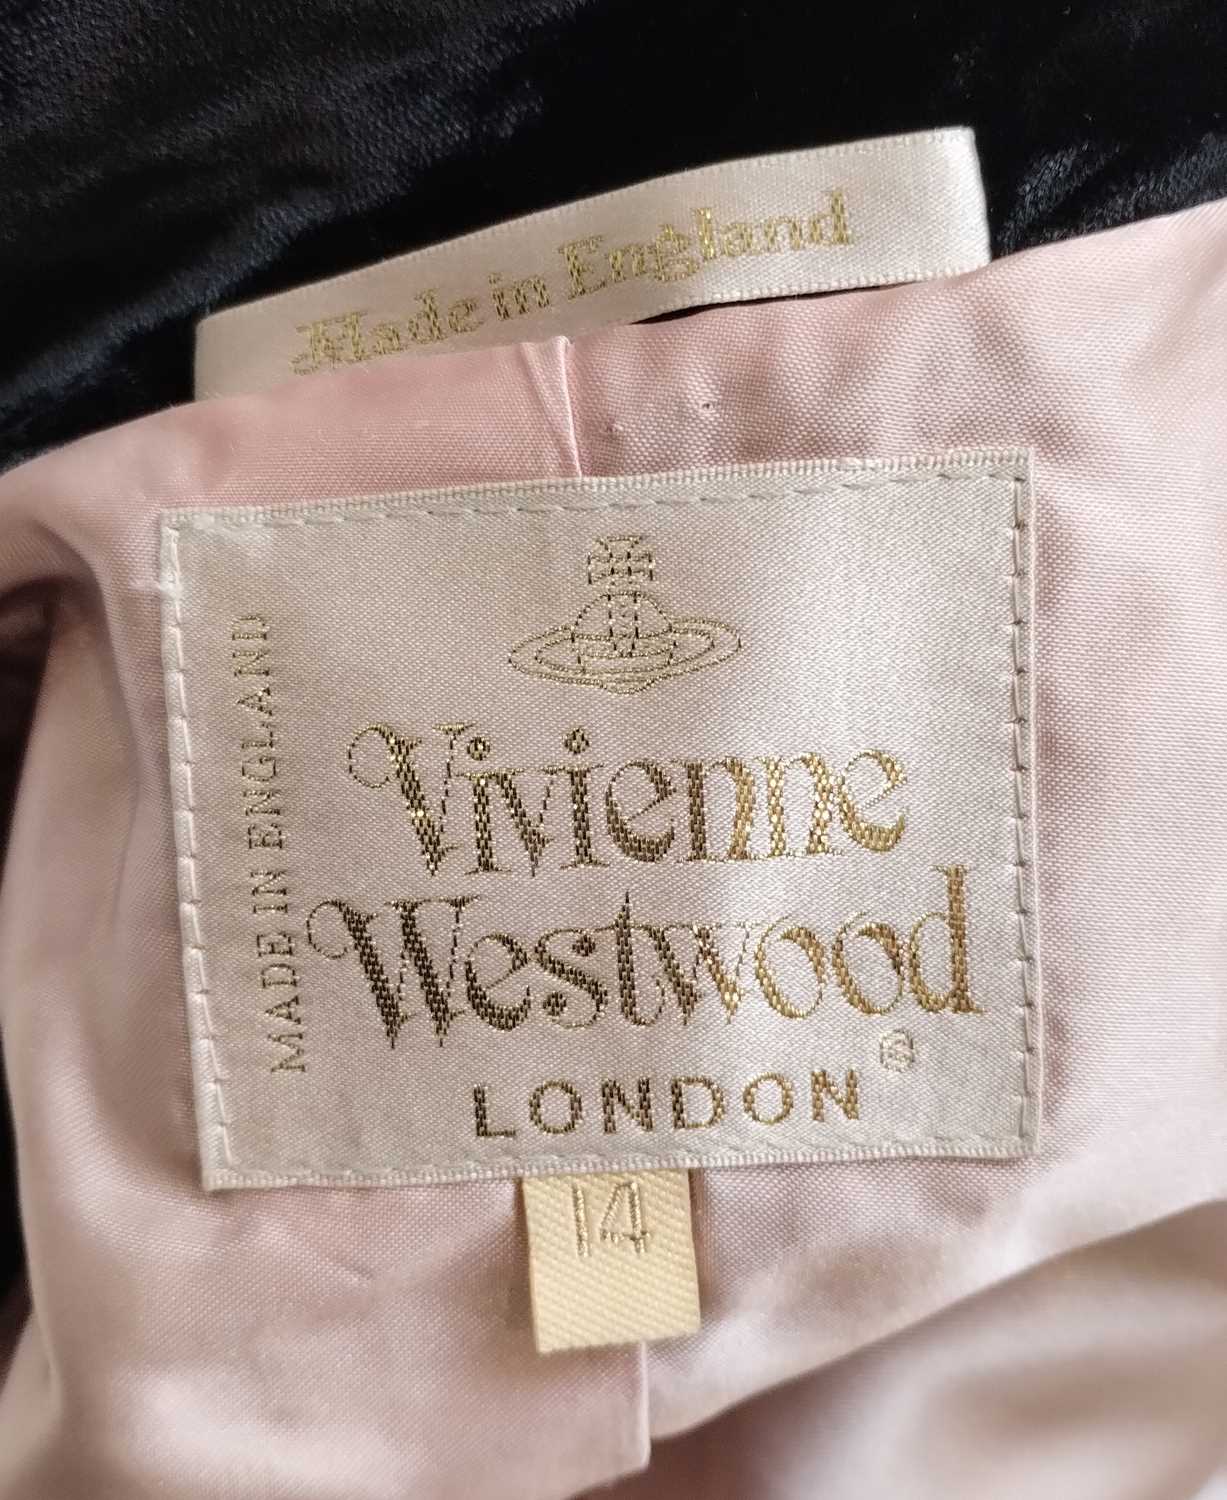 Vivienne Westwood London Black Pan Velvet Jacket, Spring/Summer Café Society Collection 1994 with - Image 17 of 27